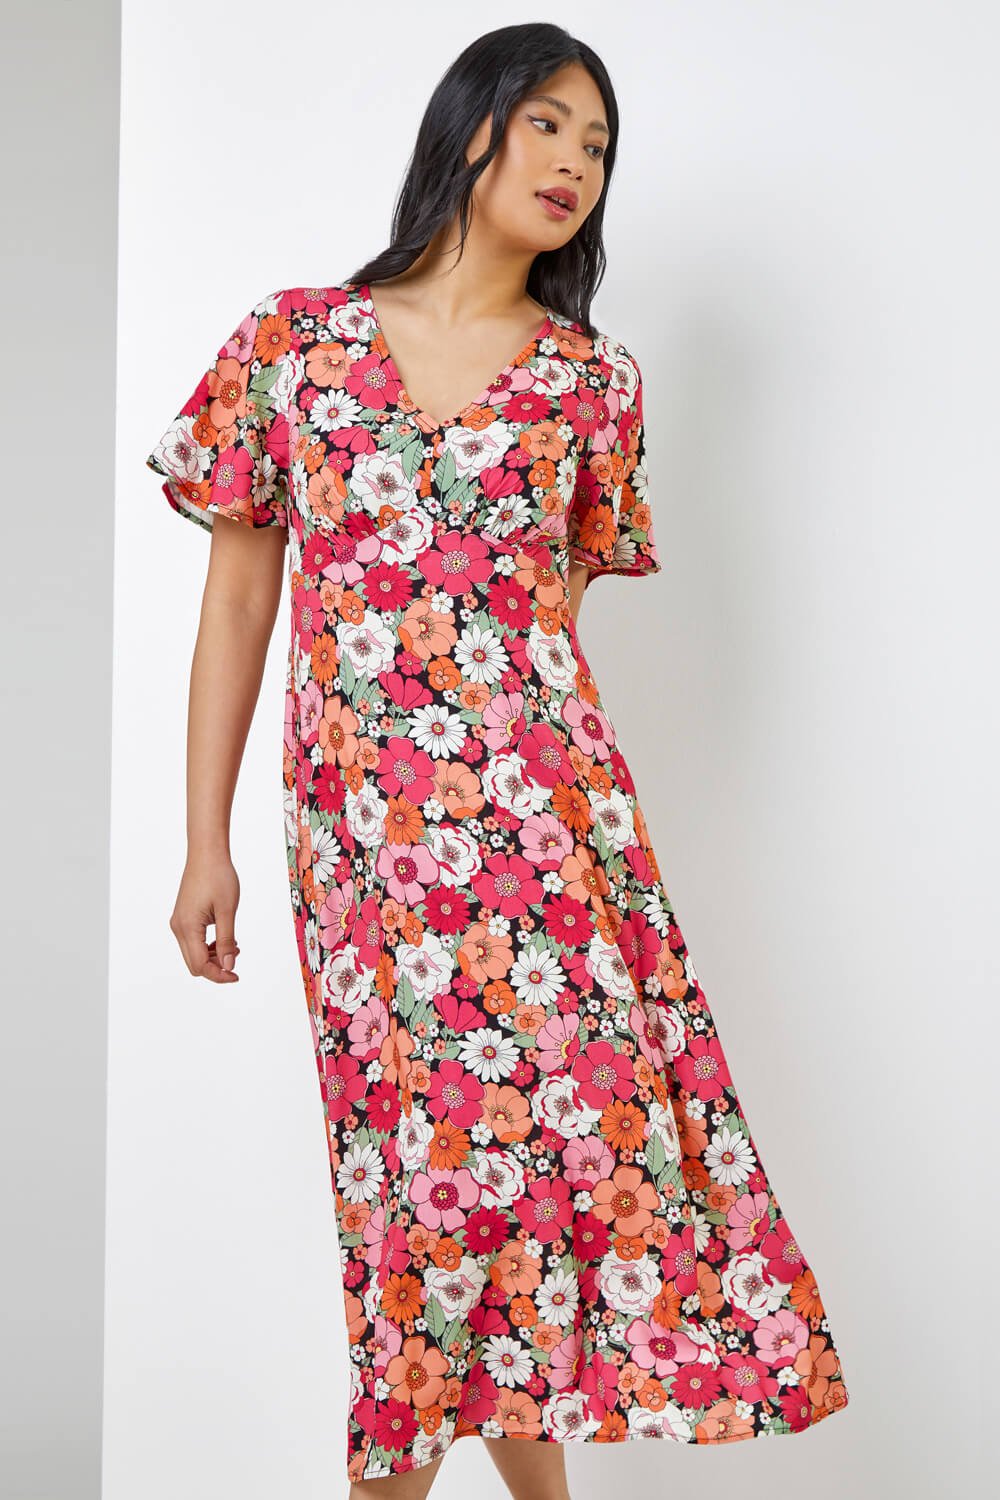 CORAL Petite Floral Print Flute Sleeve Dress, Image 3 of 5